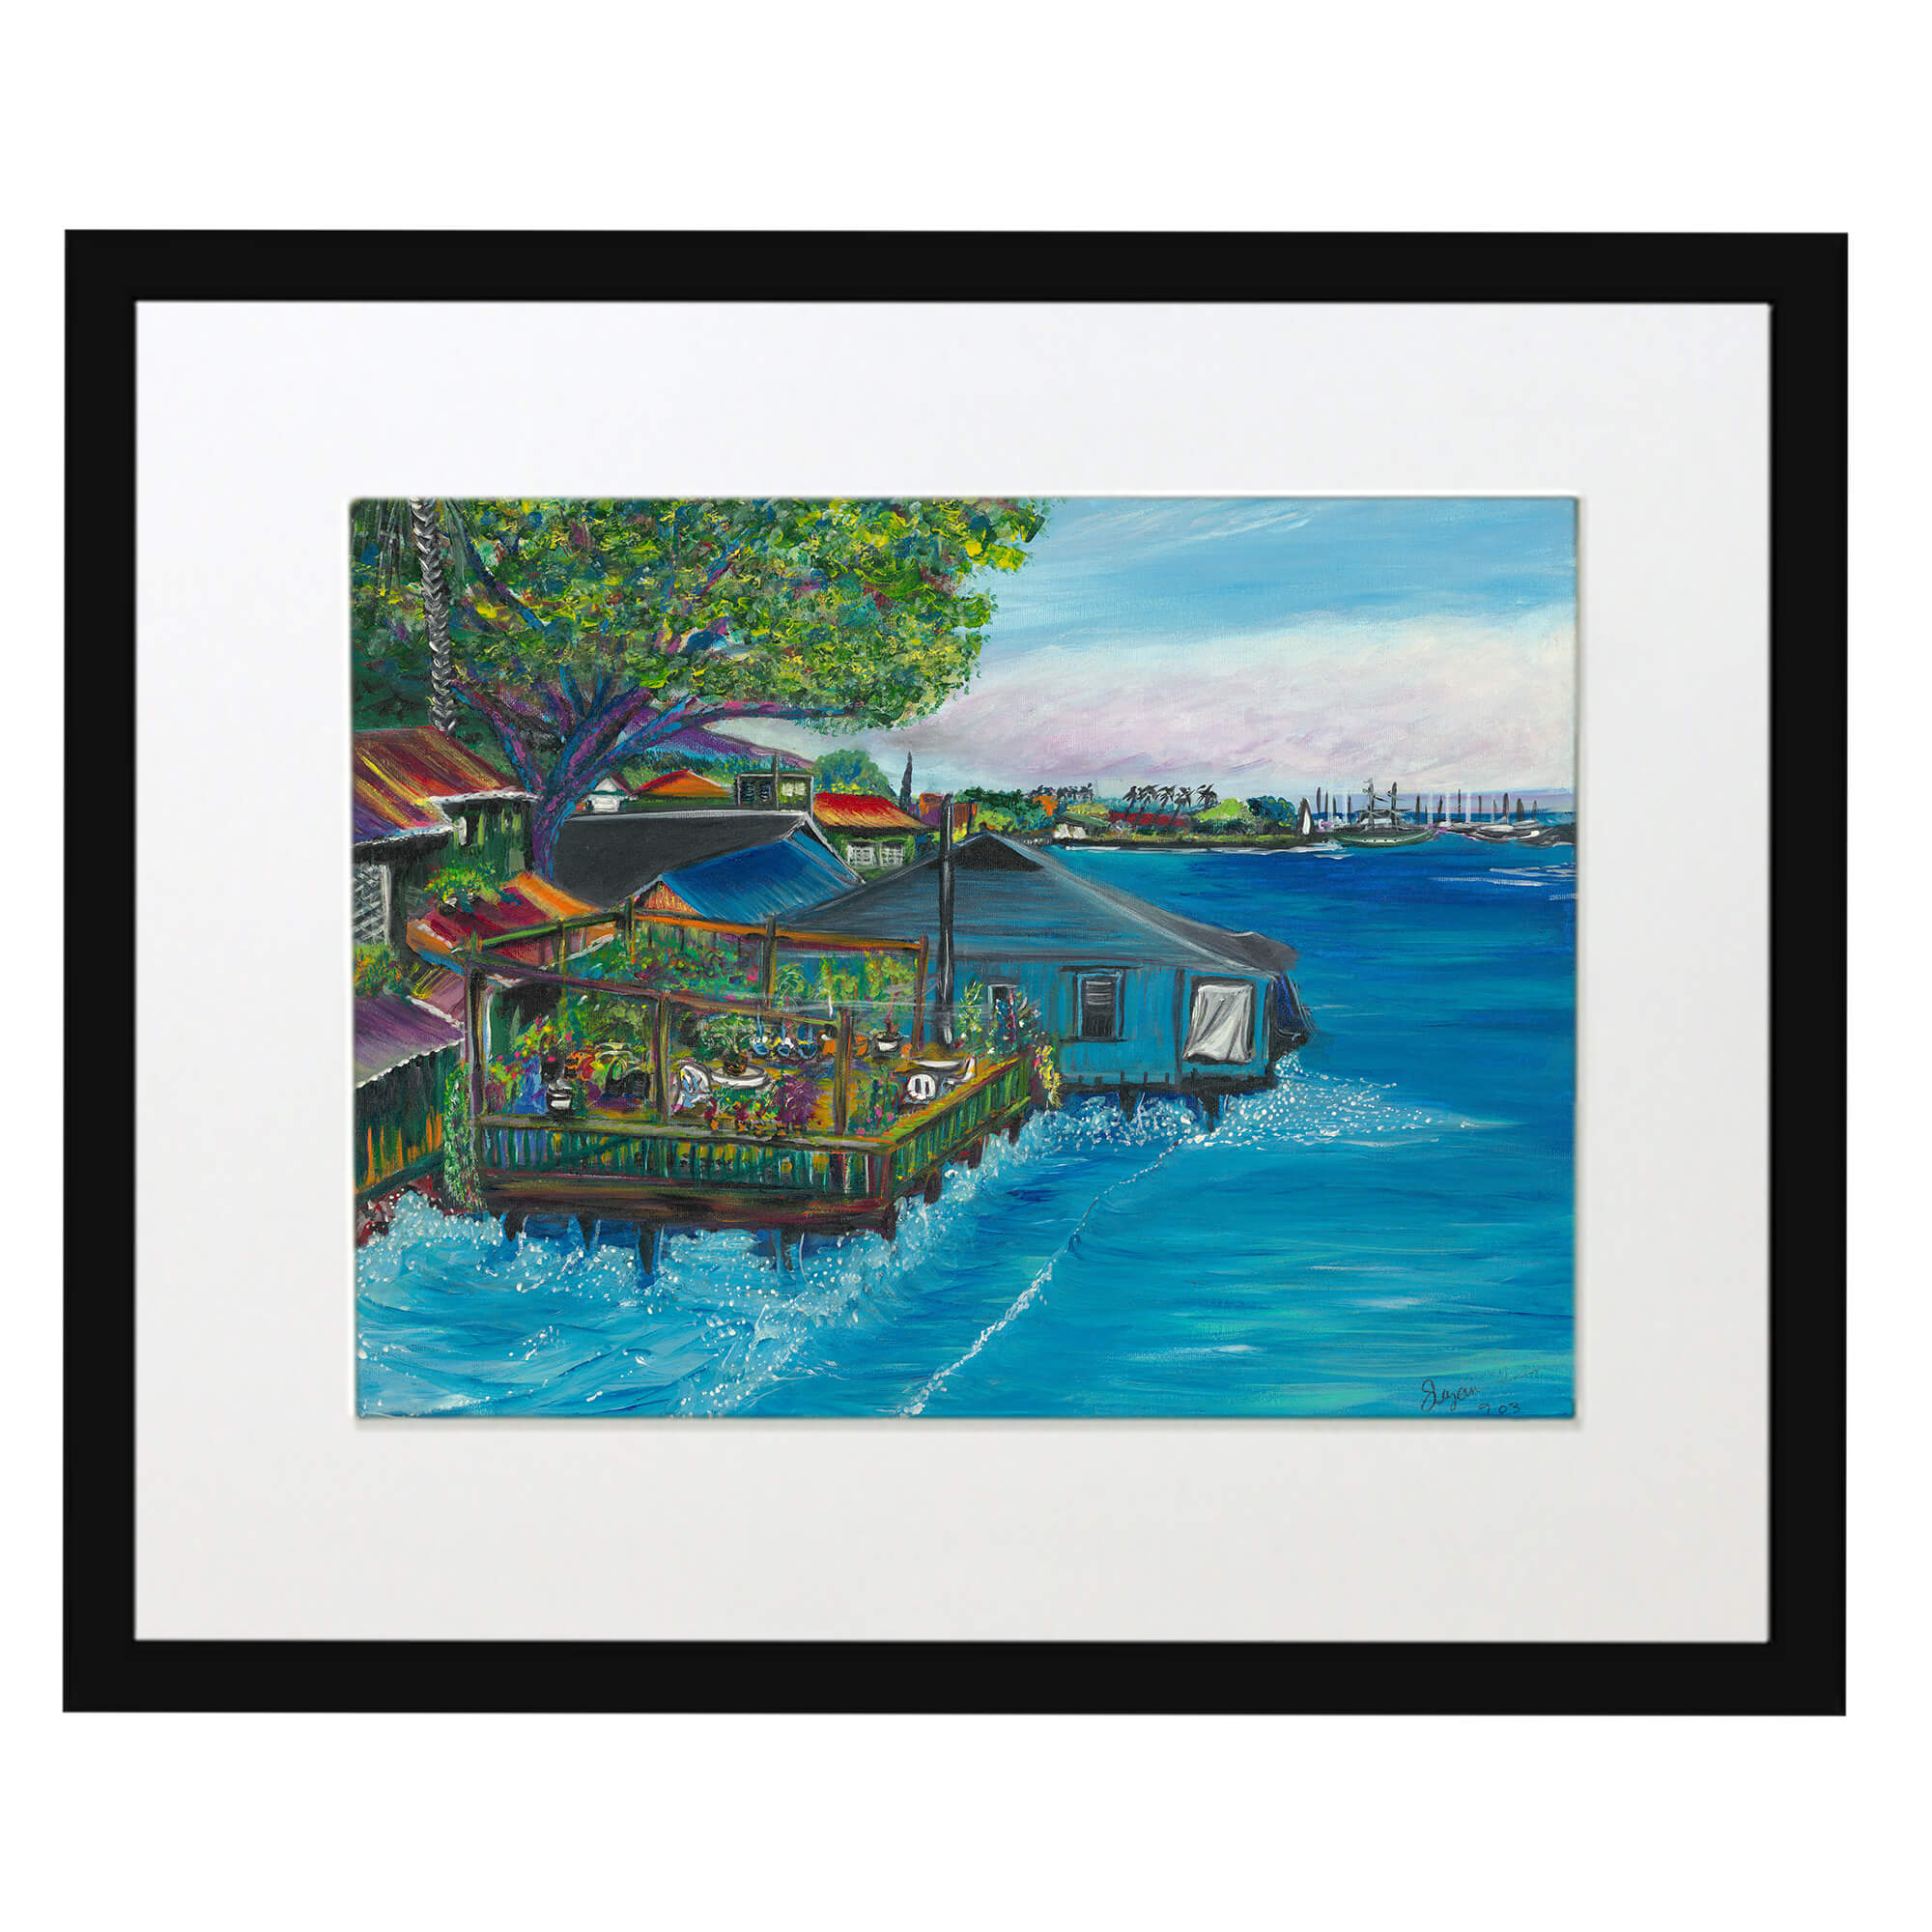 Matted art print with black frame featuring a blue house    by  hawaii artist Suzanne MacAdam 